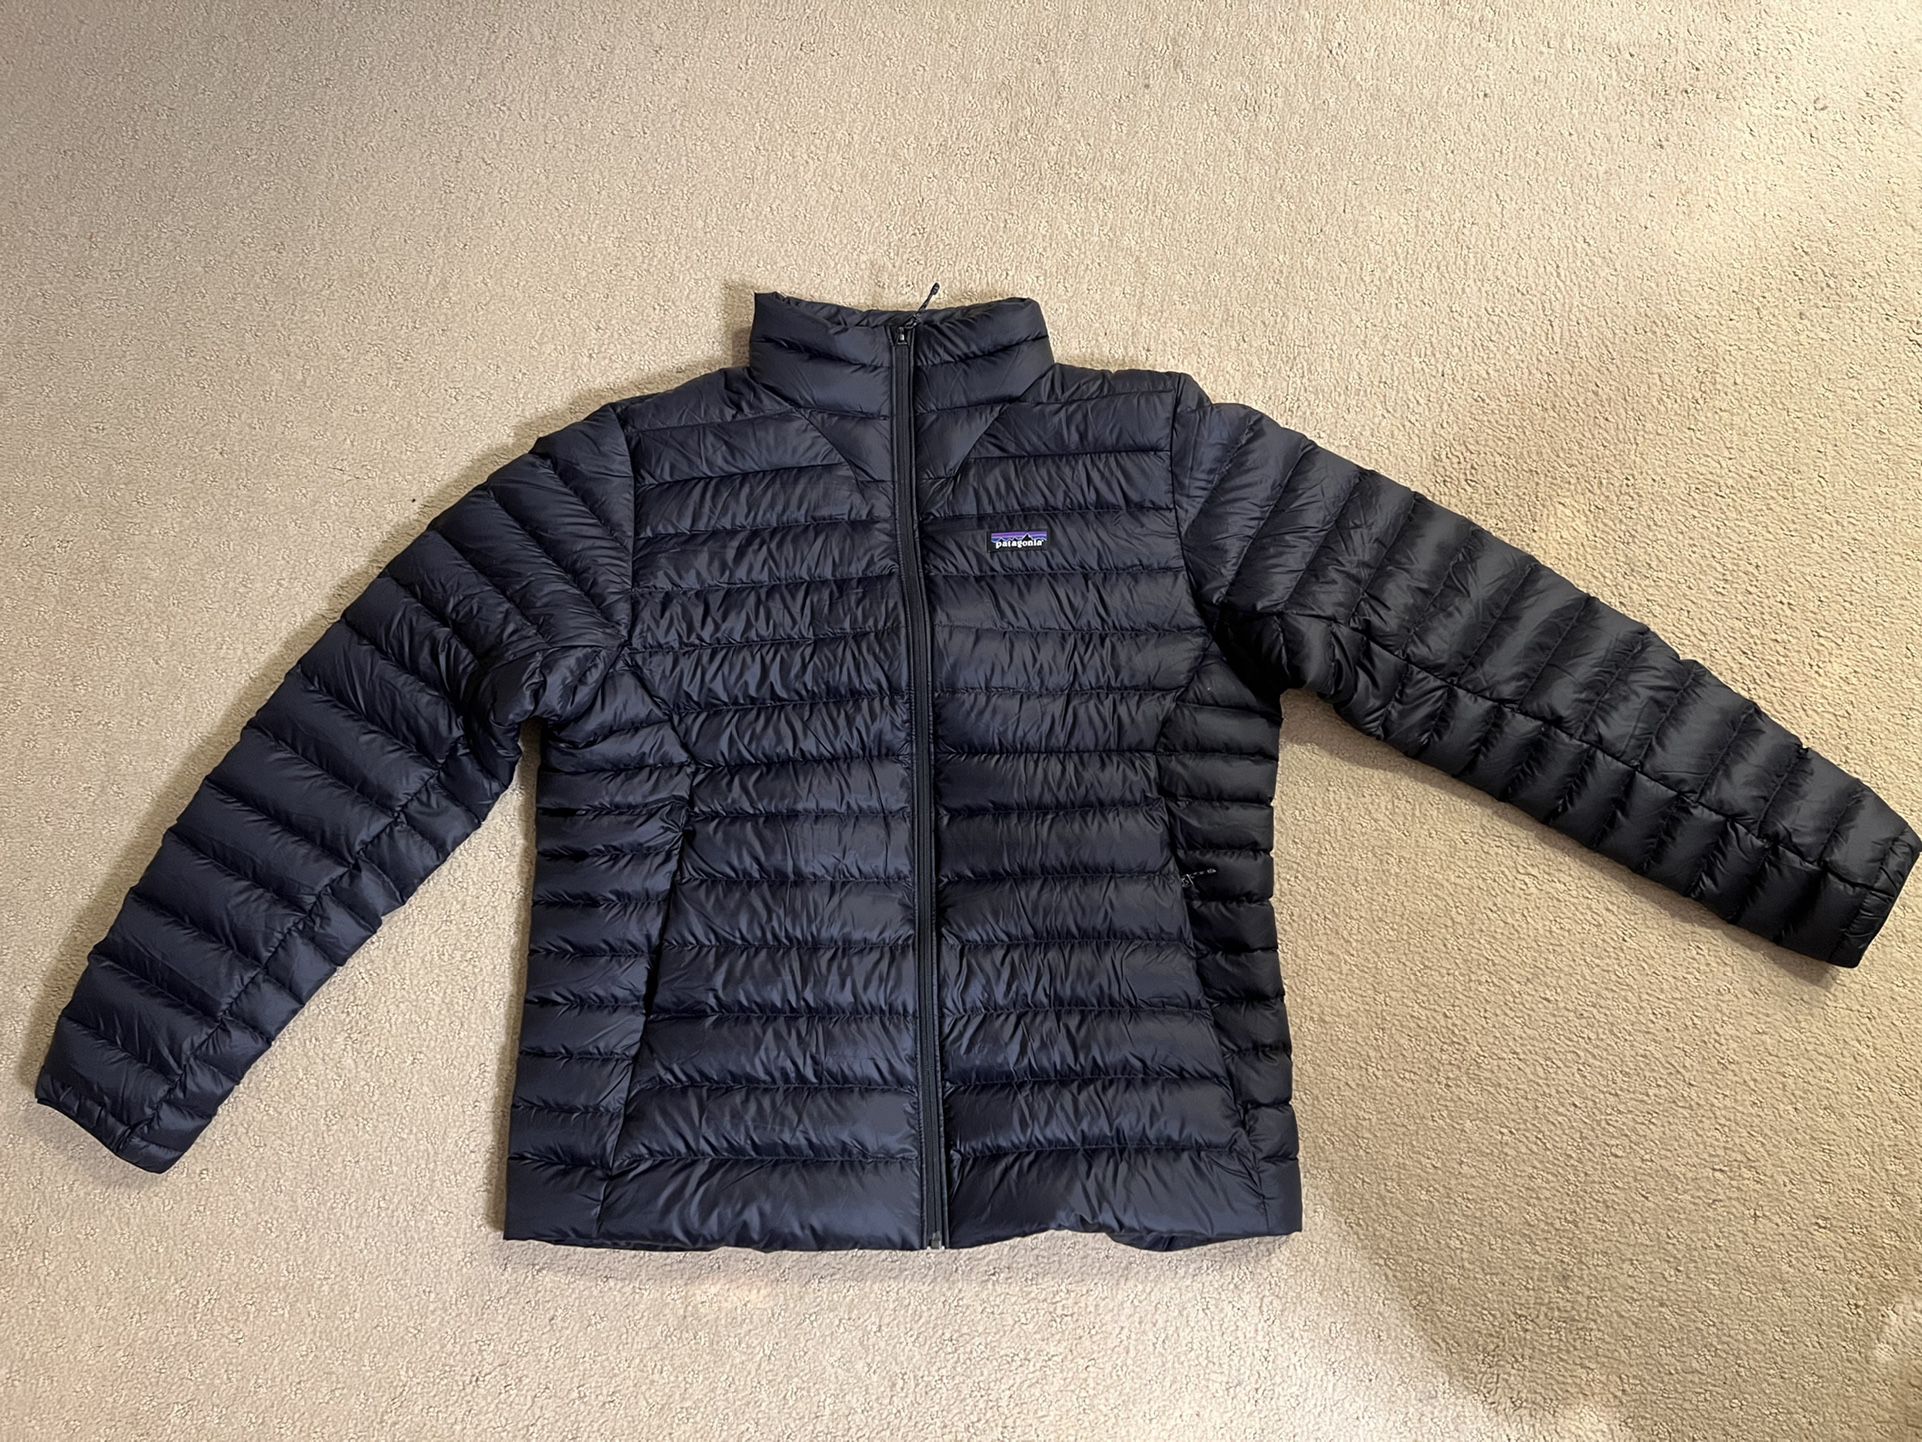 Patagonia “Mens Down Sweater” Brand New…Size Large 